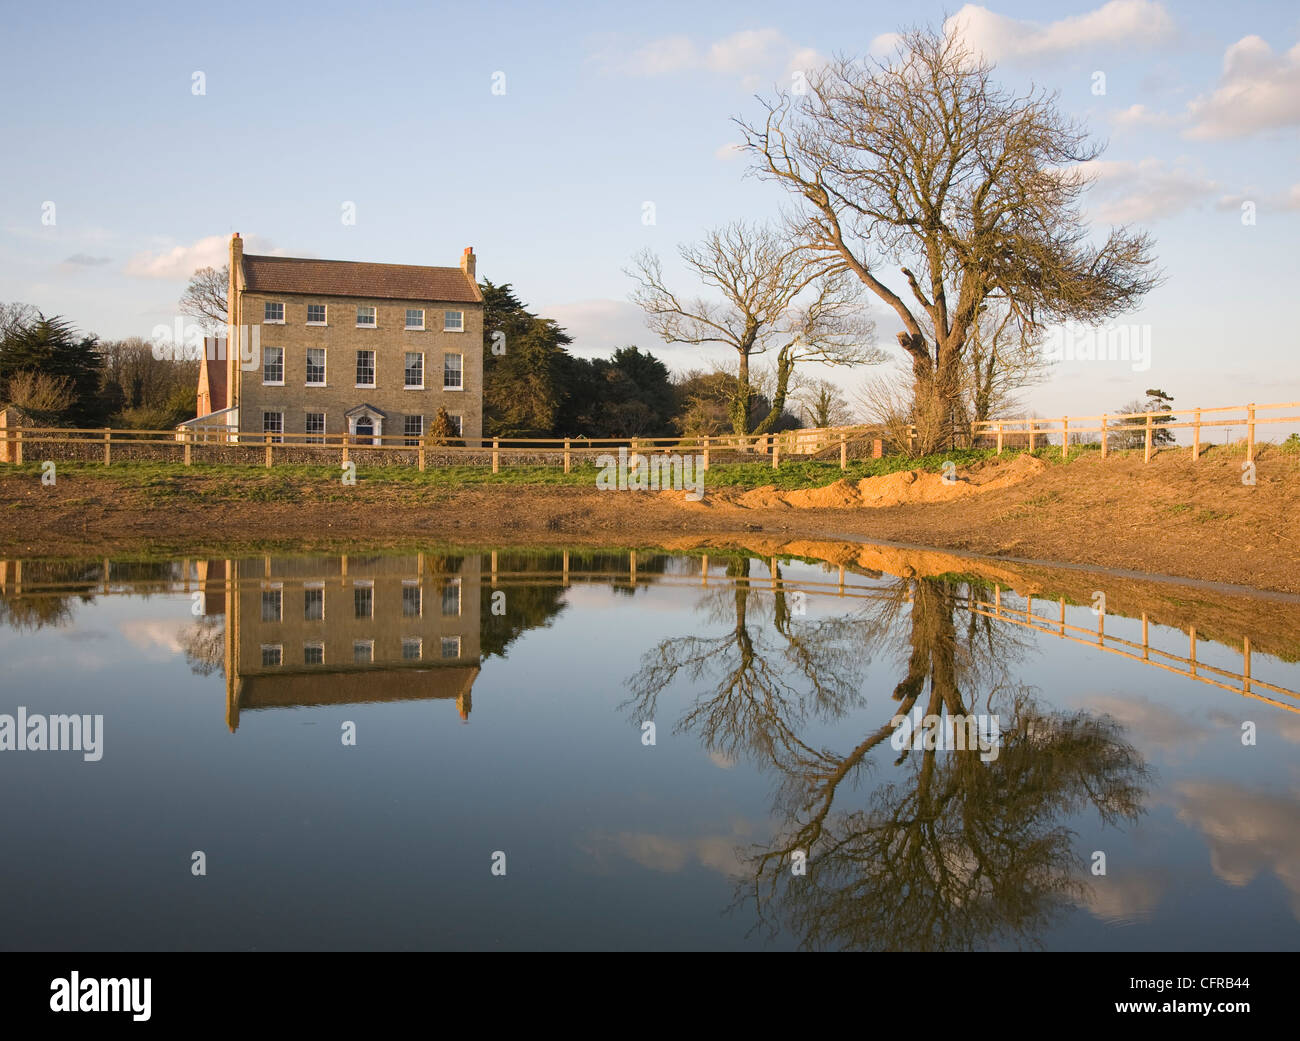 Georgian farmhouse reflected in pond water Bawdsey, Suffolk, England Stock Photo